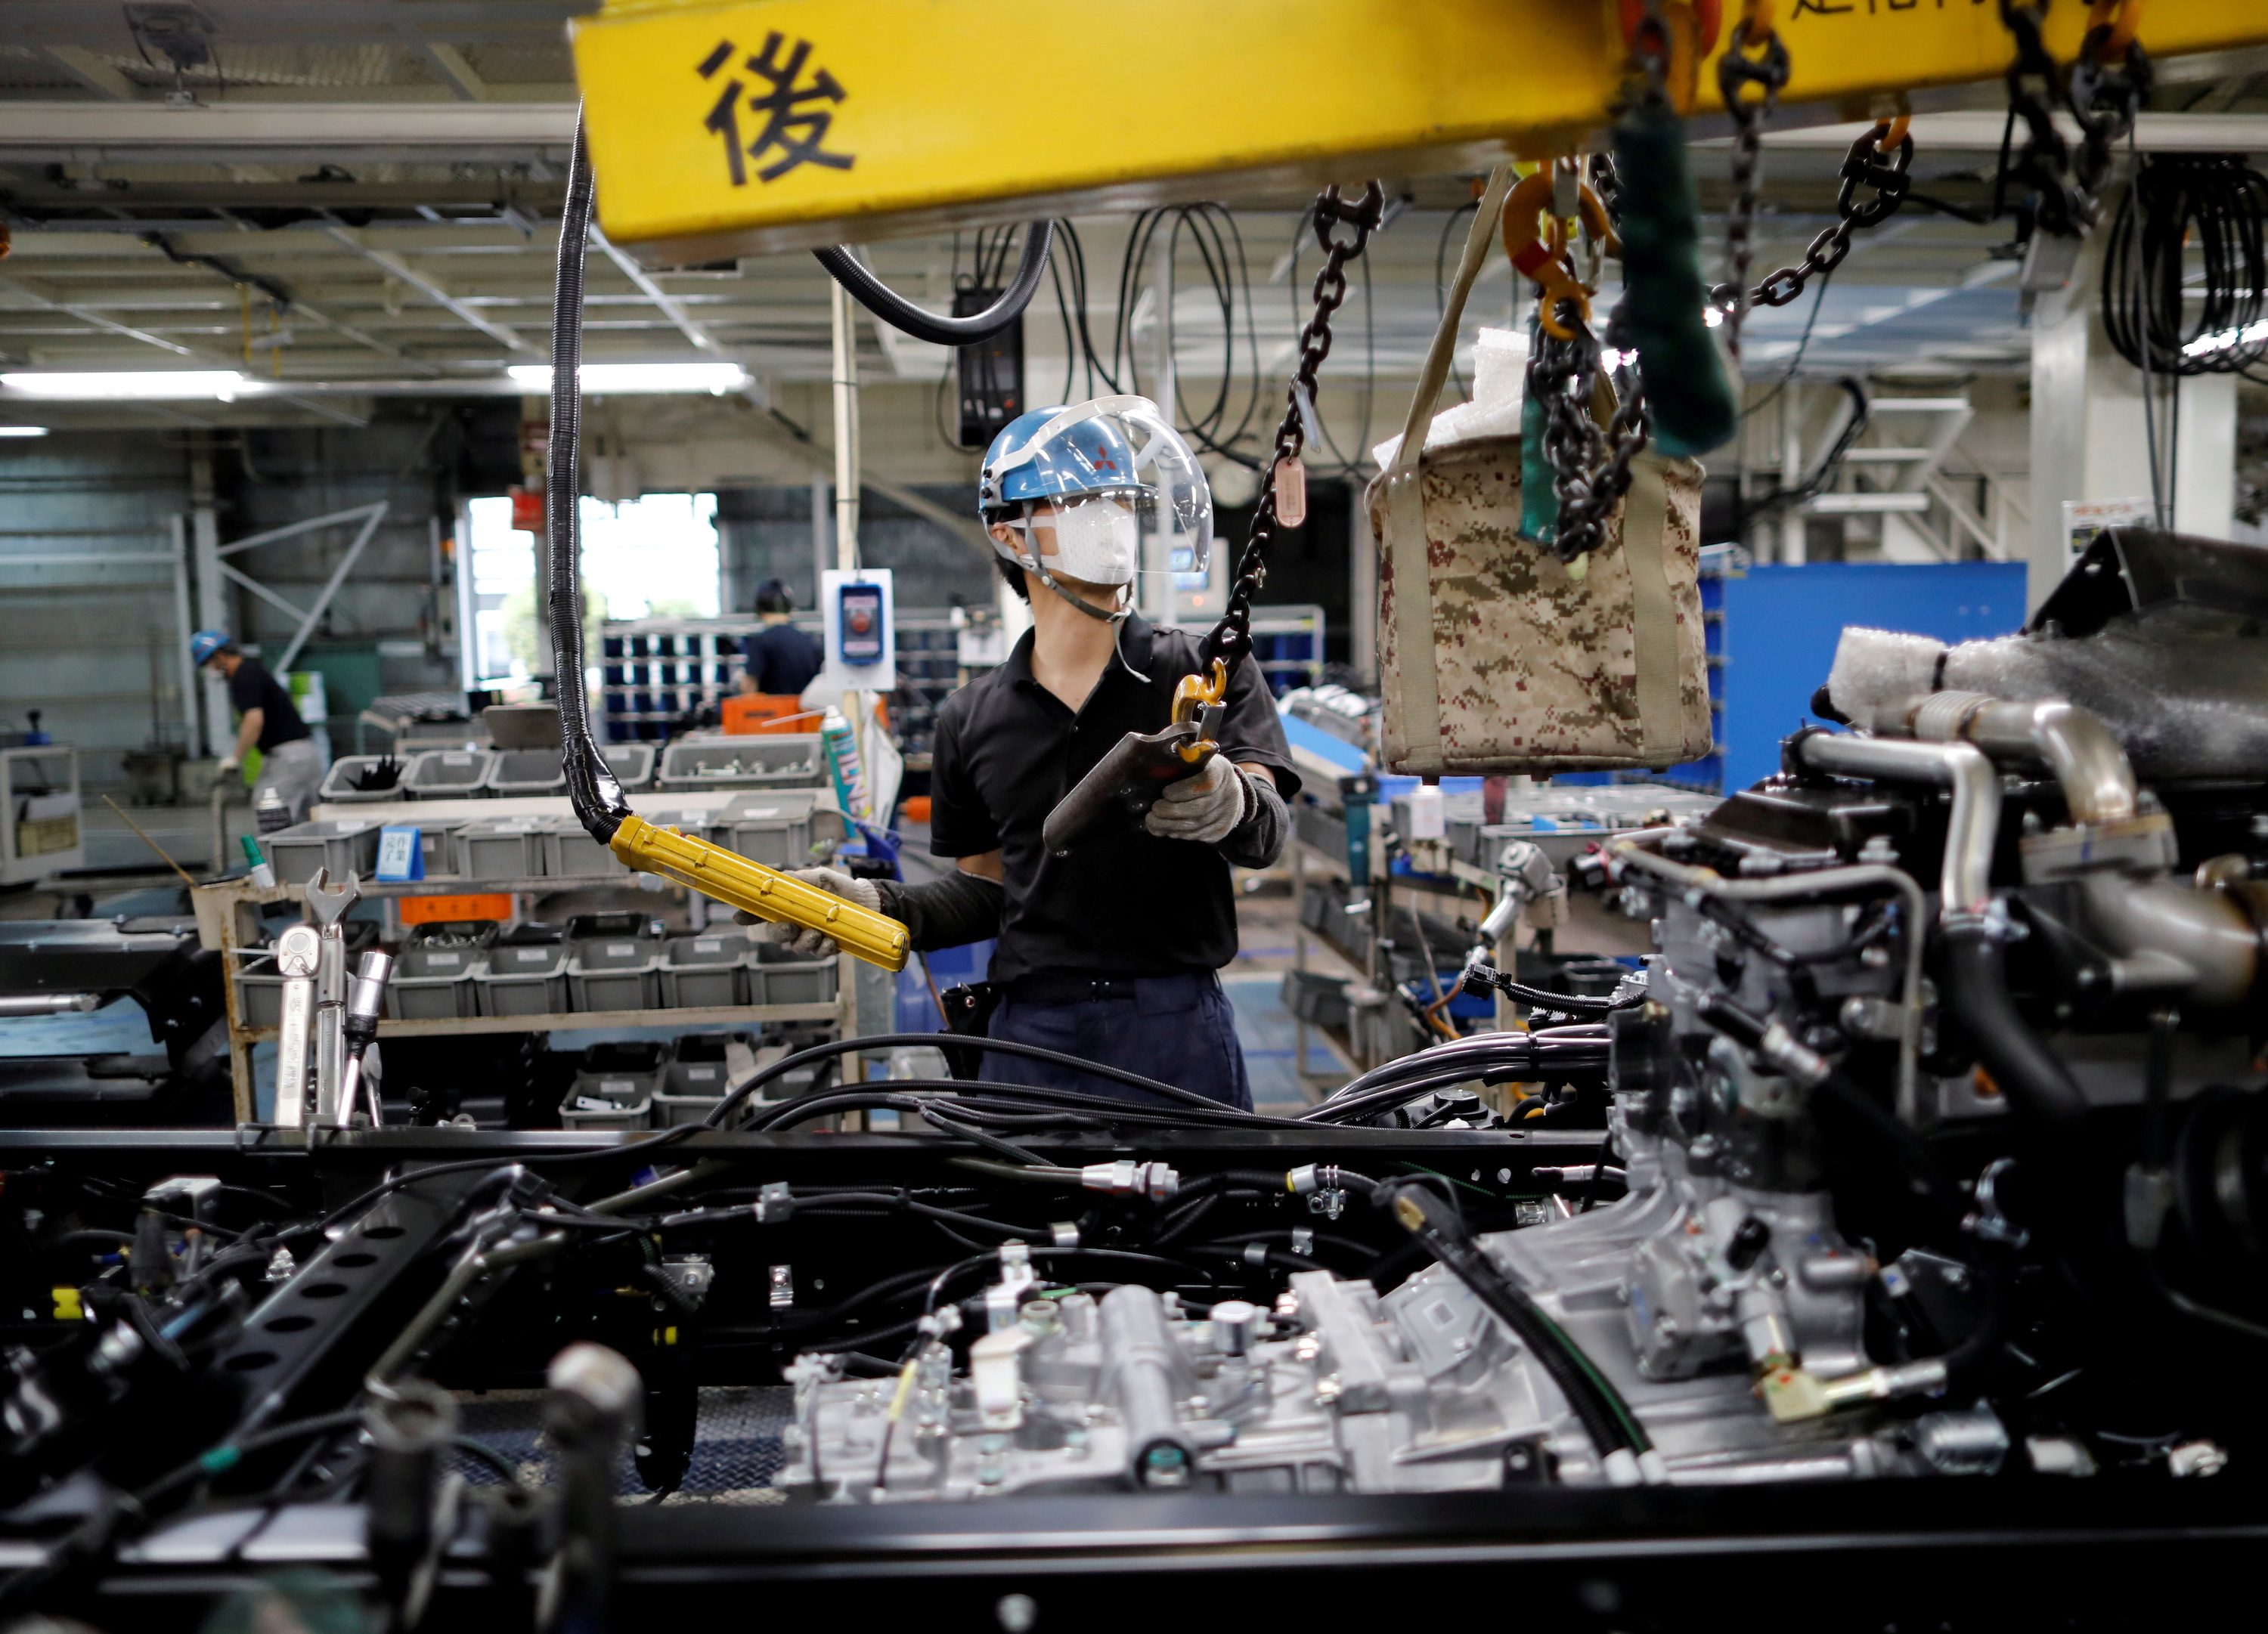 Factories struggling as supply constraints hit, costs rise